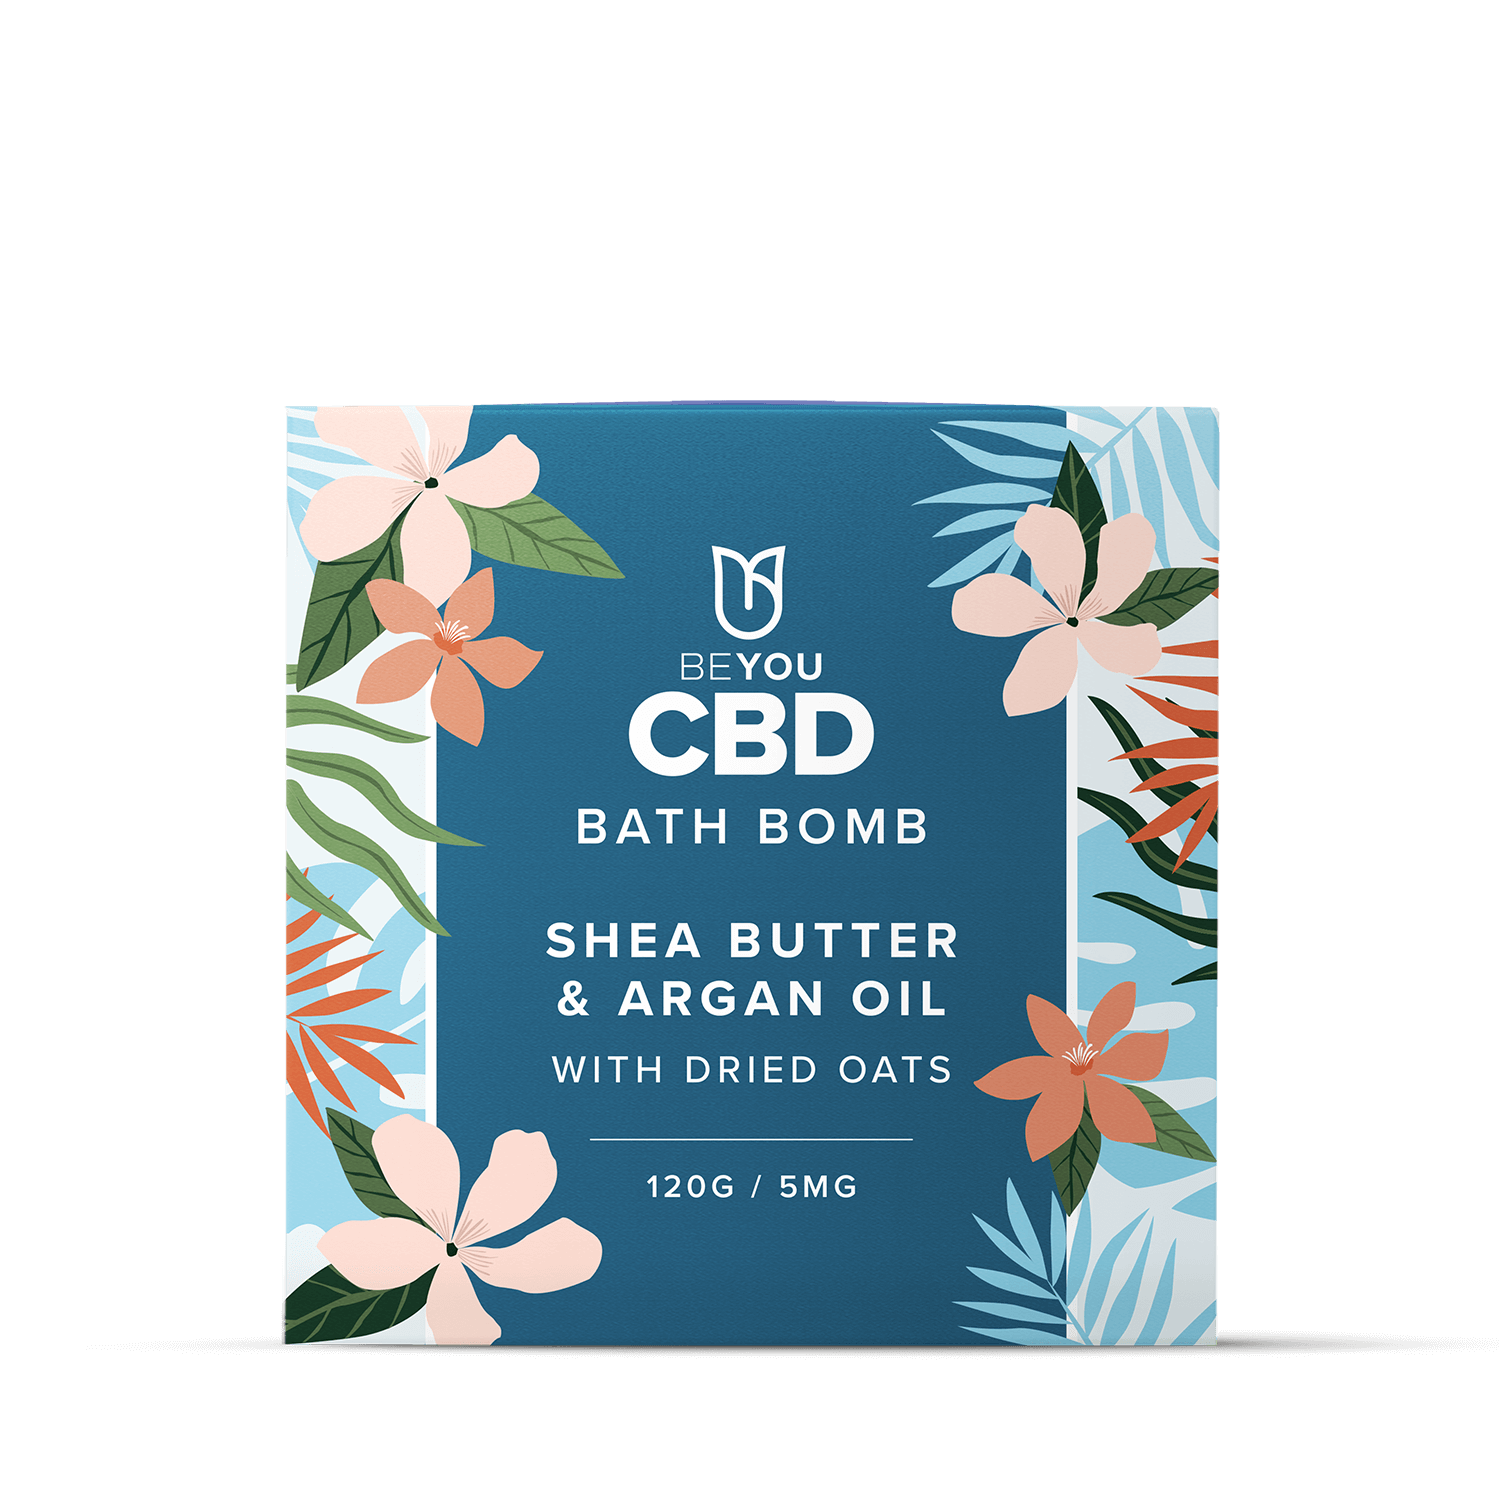 high strength CBD bath bomb with shea butter and argan oil combined with dried oats for skin